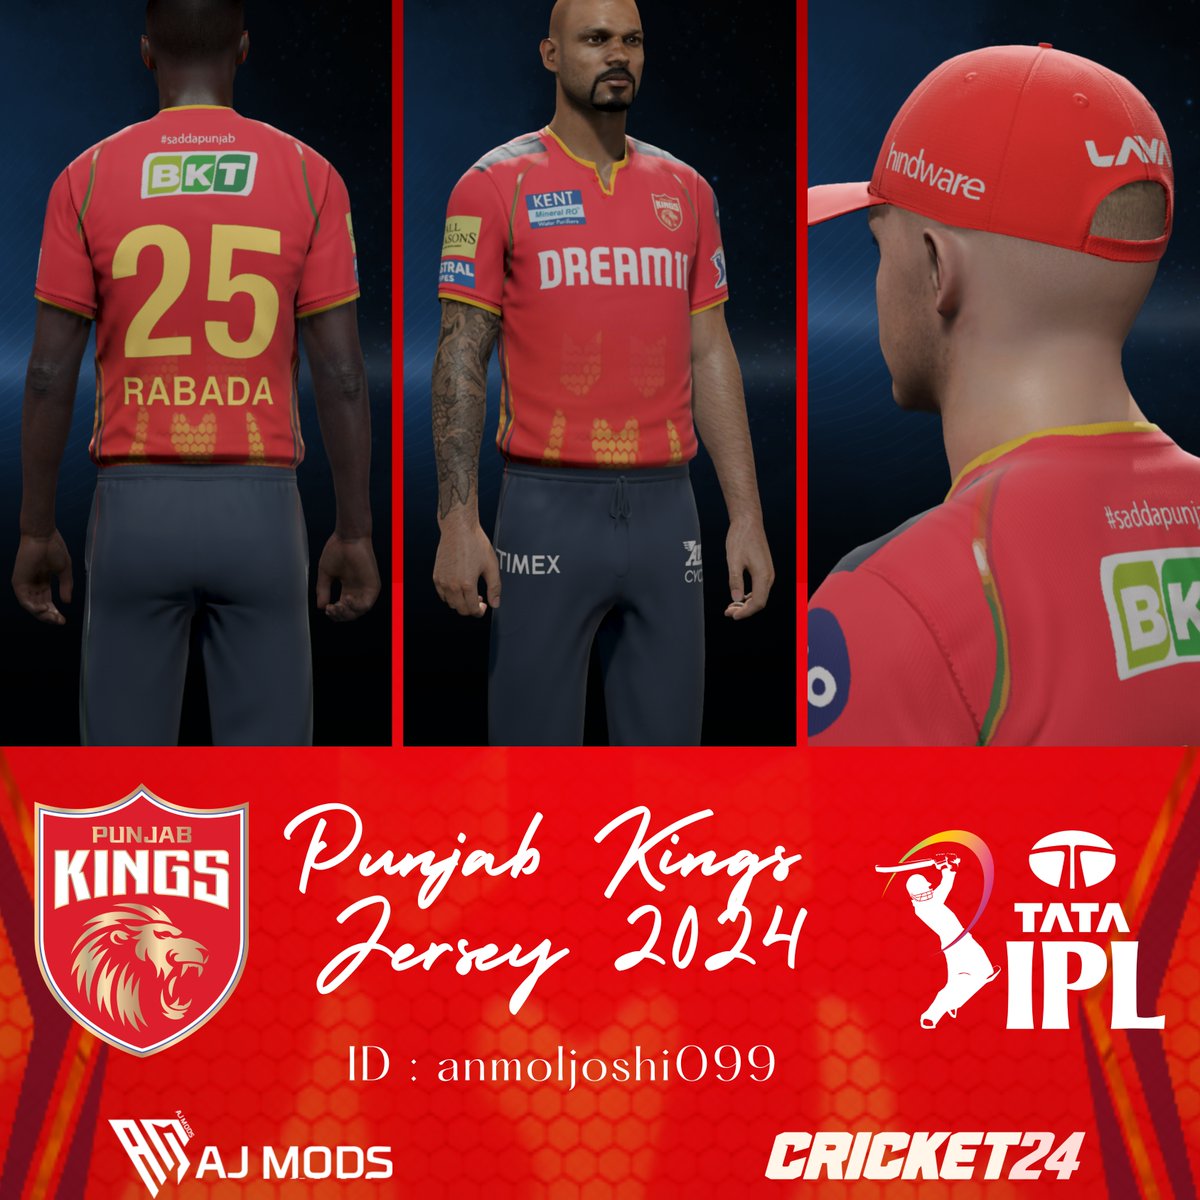 🏏 Are you all set for the exciting PBKS vs RCB match? 🎉 Gear up with the latest PBKS jersey for Cricket 24! 🌟 Download it now from ID: anmoljoshi099. 
🔥 Let's get ready to witness an epic showdown! 💪 #RCBvsPBKS #IPL24 #Cricket24 #AJMods 🏆